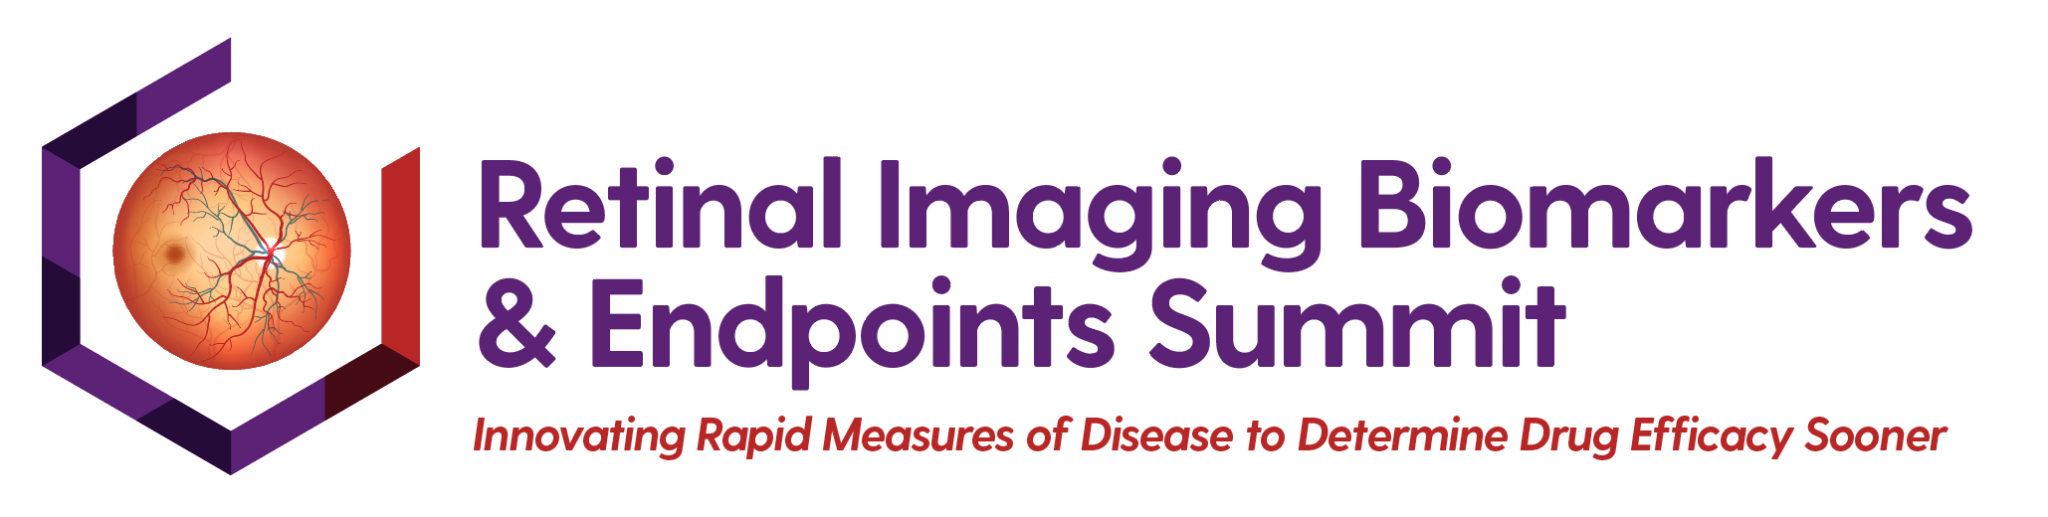 5756_Retinal-Imaging-Biomarkers-Endpoints-logo-2048x517